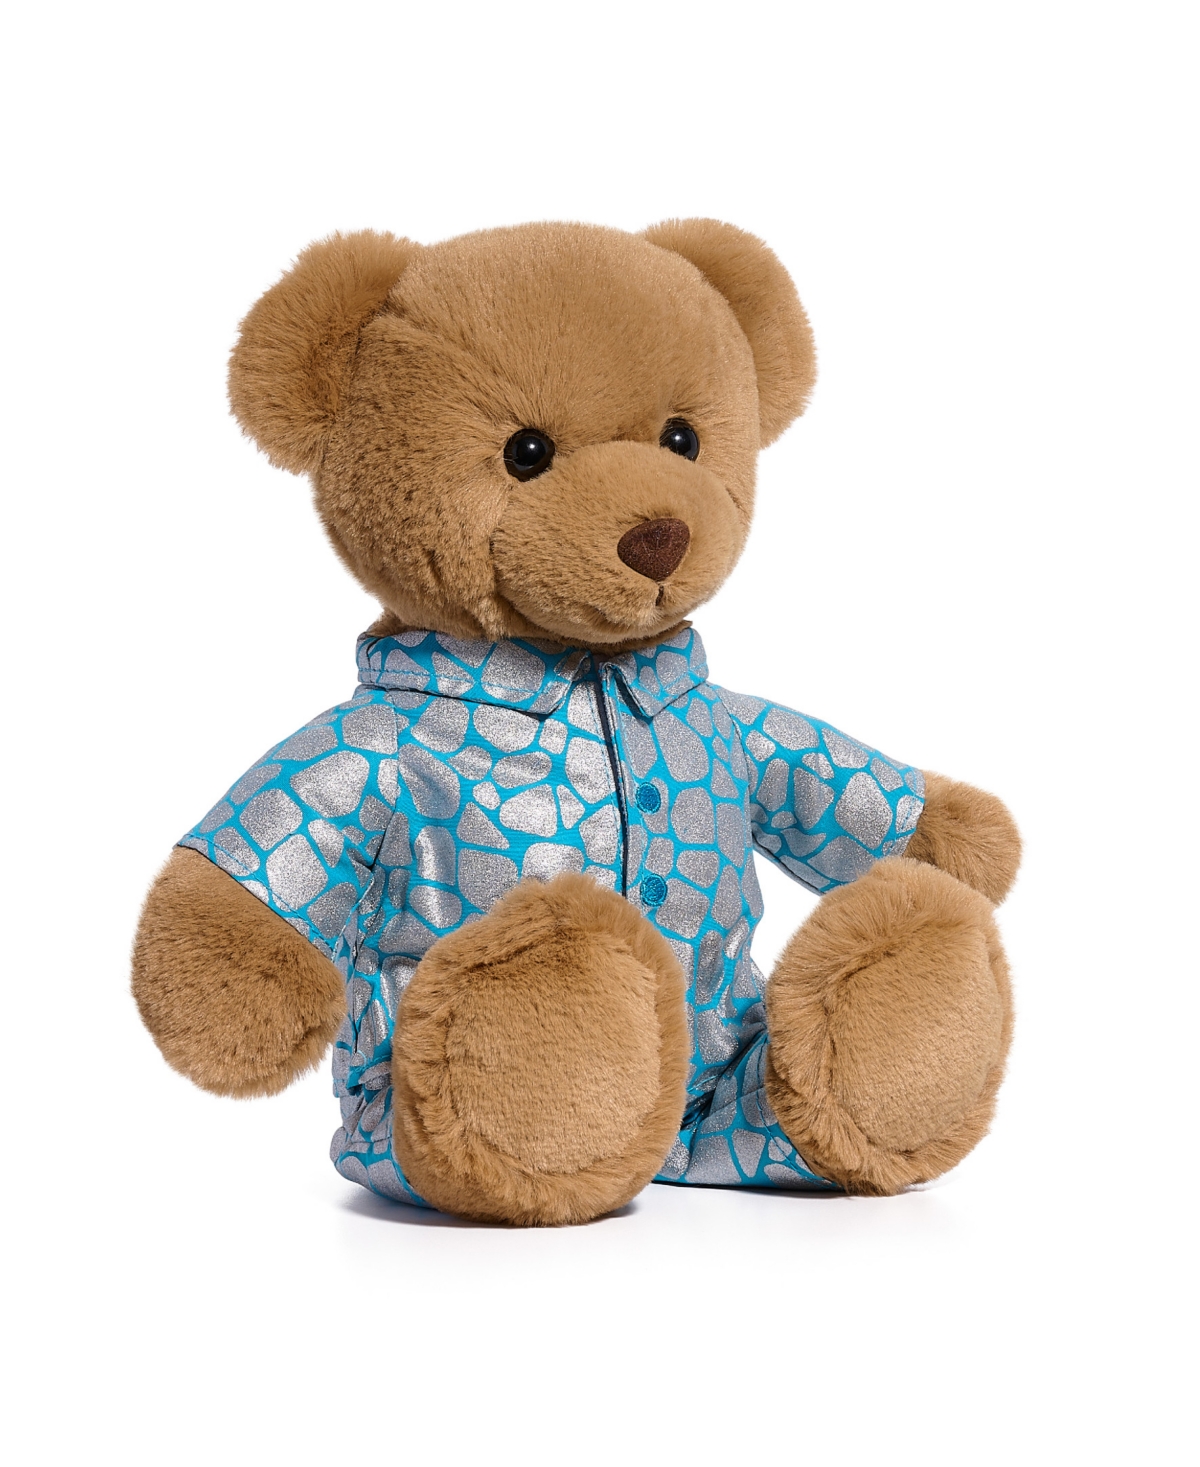 Shop Geoffrey's Toy Box 9.5" Toy Plush Teddy Bear With Robe, Created For Macys In Pastel Blue